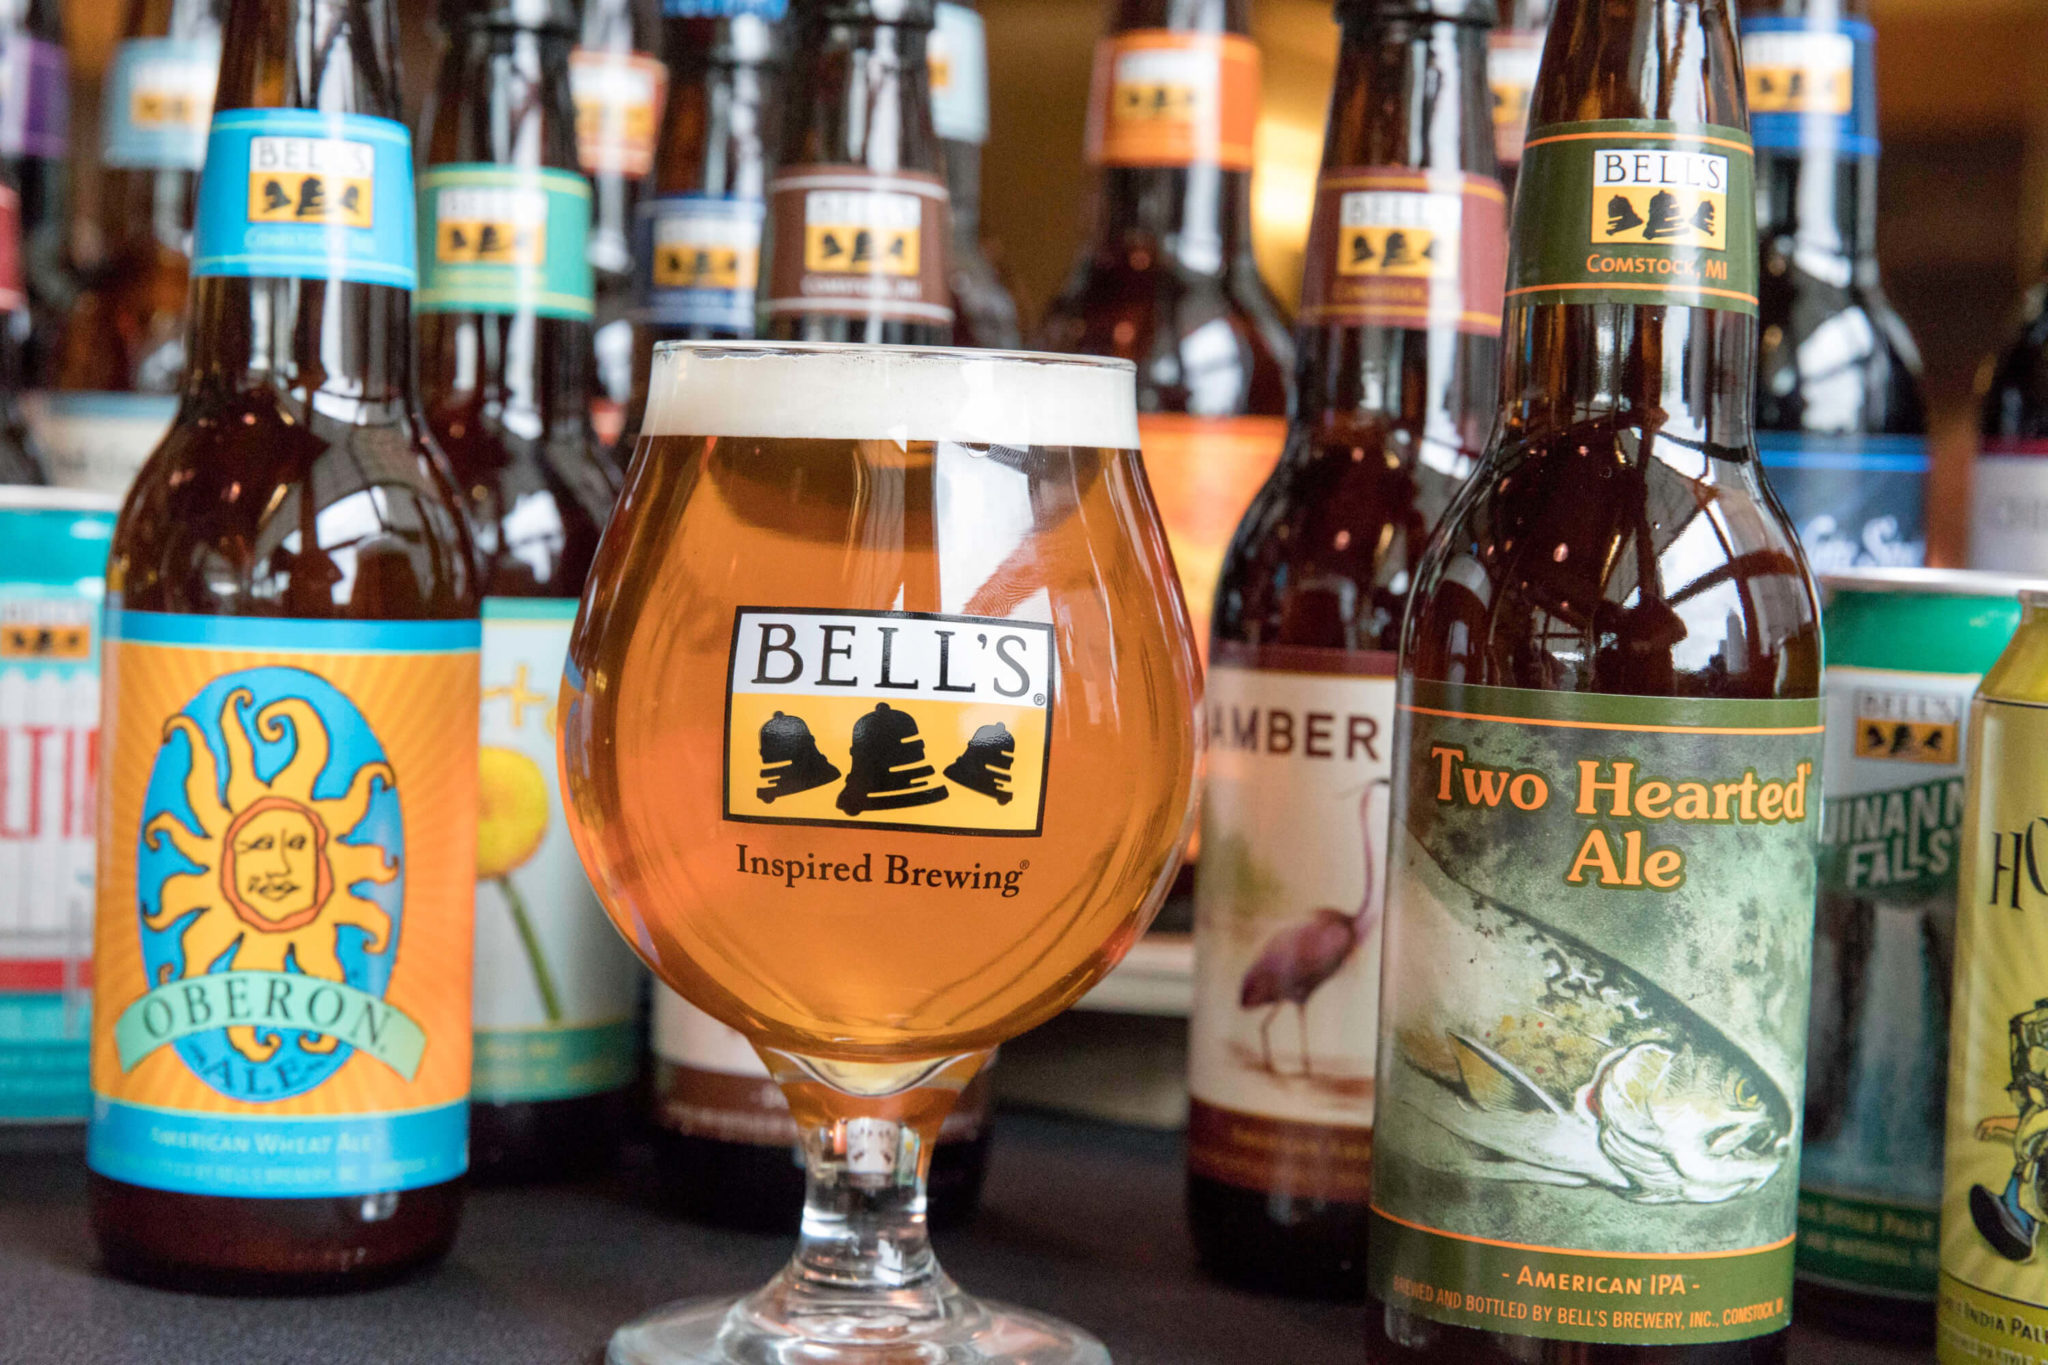 bell-s-beer-announces-distribution-to-new-jersey-this-summer-sjbs